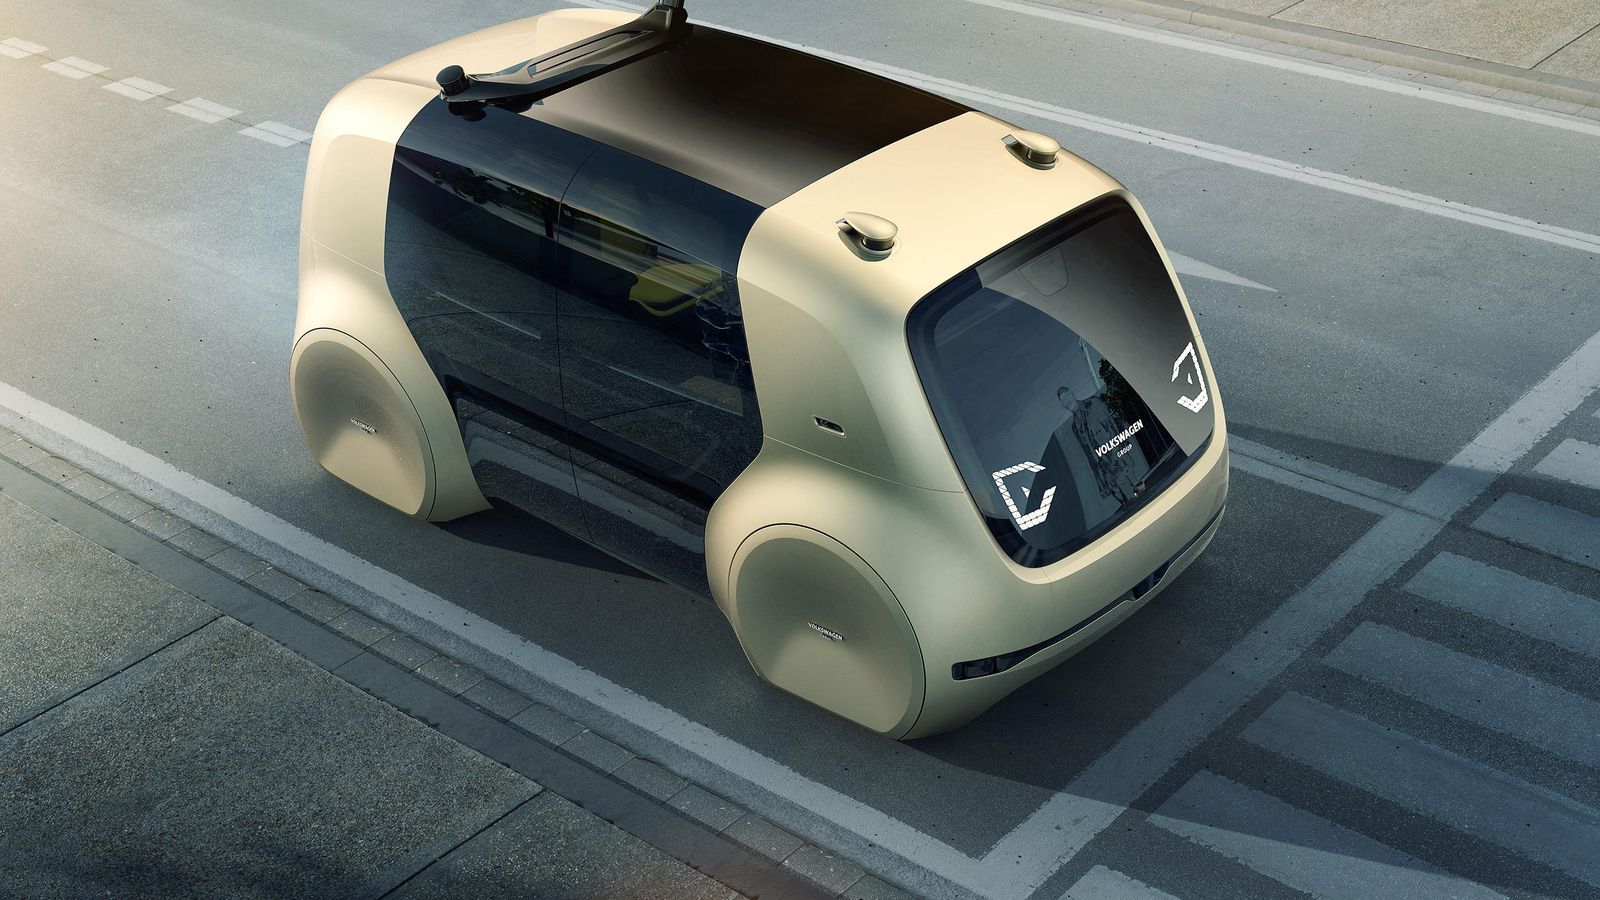 Volkswagen Takes Driver-less Tech To Next Level; Adds Highly Automated Cars On Road - Volkswagen India